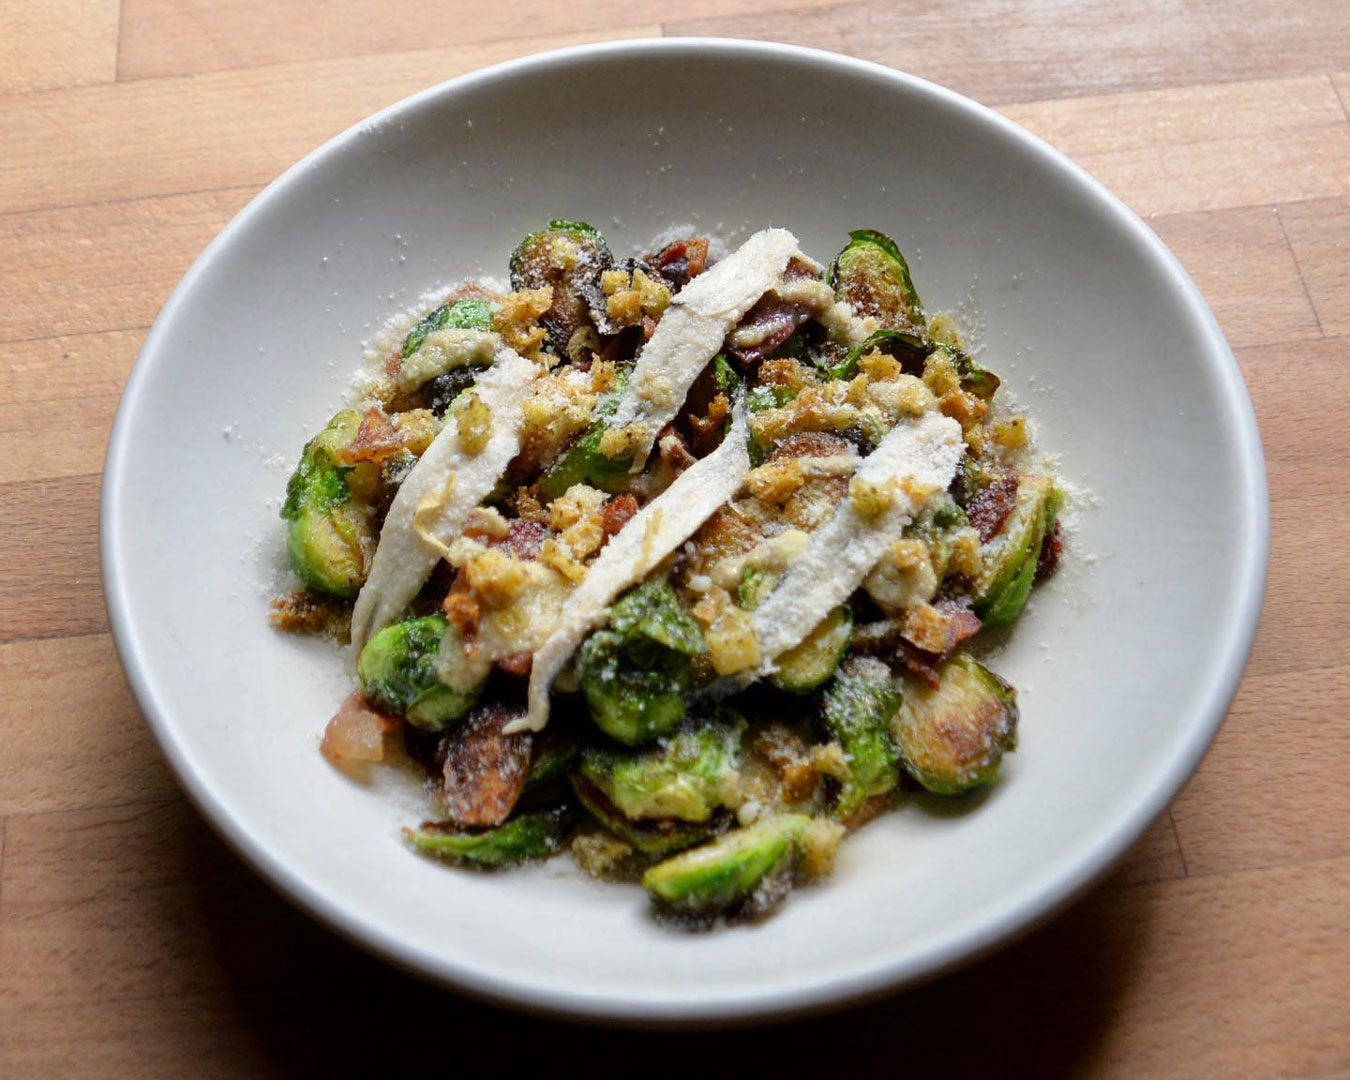 Brussel sprout salad